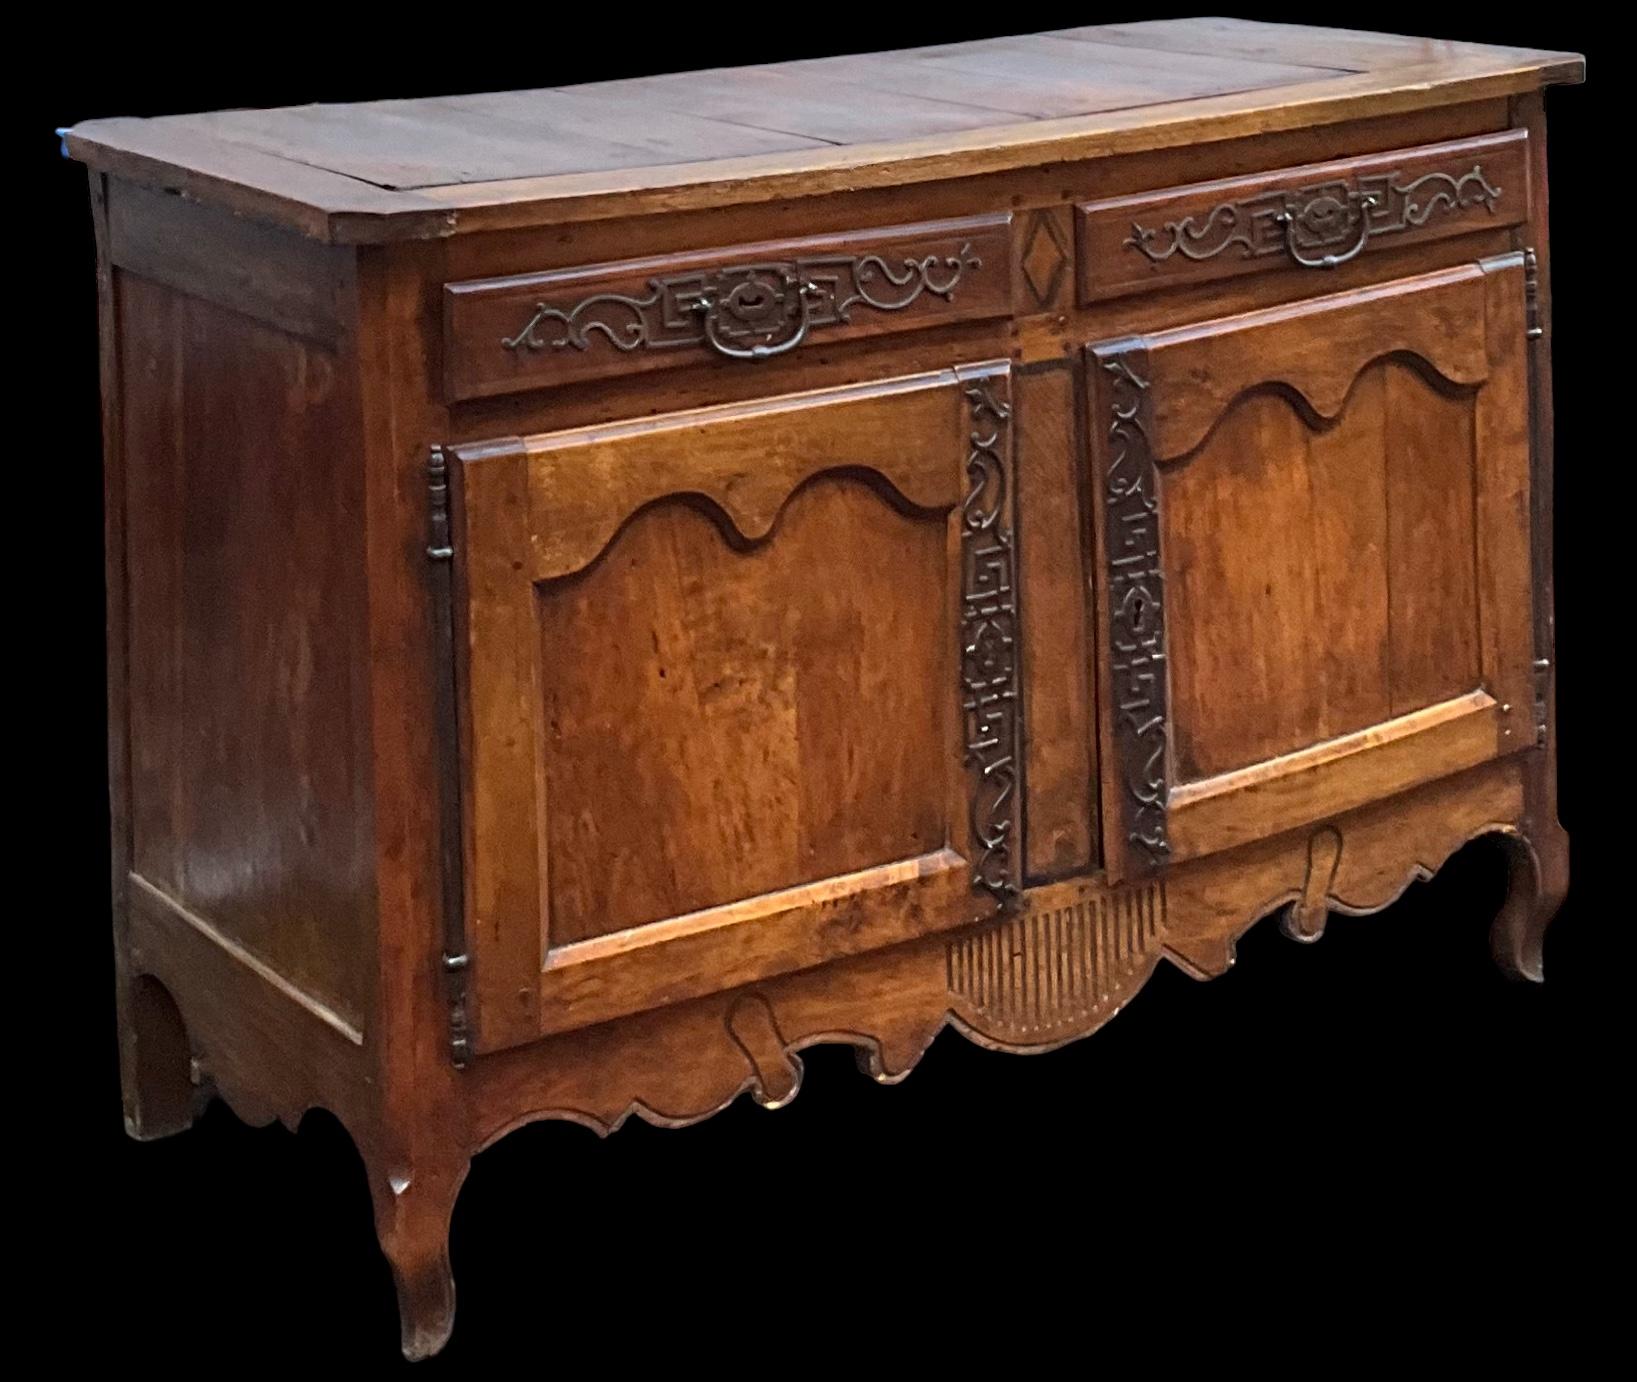 This is a hand hewn Louis XV carved fruitwood cabinet or sideboard. The iron hardware is wonderful. The piece opens to a single shelf. It is in very good antique condition. Just in time for the holidays. 